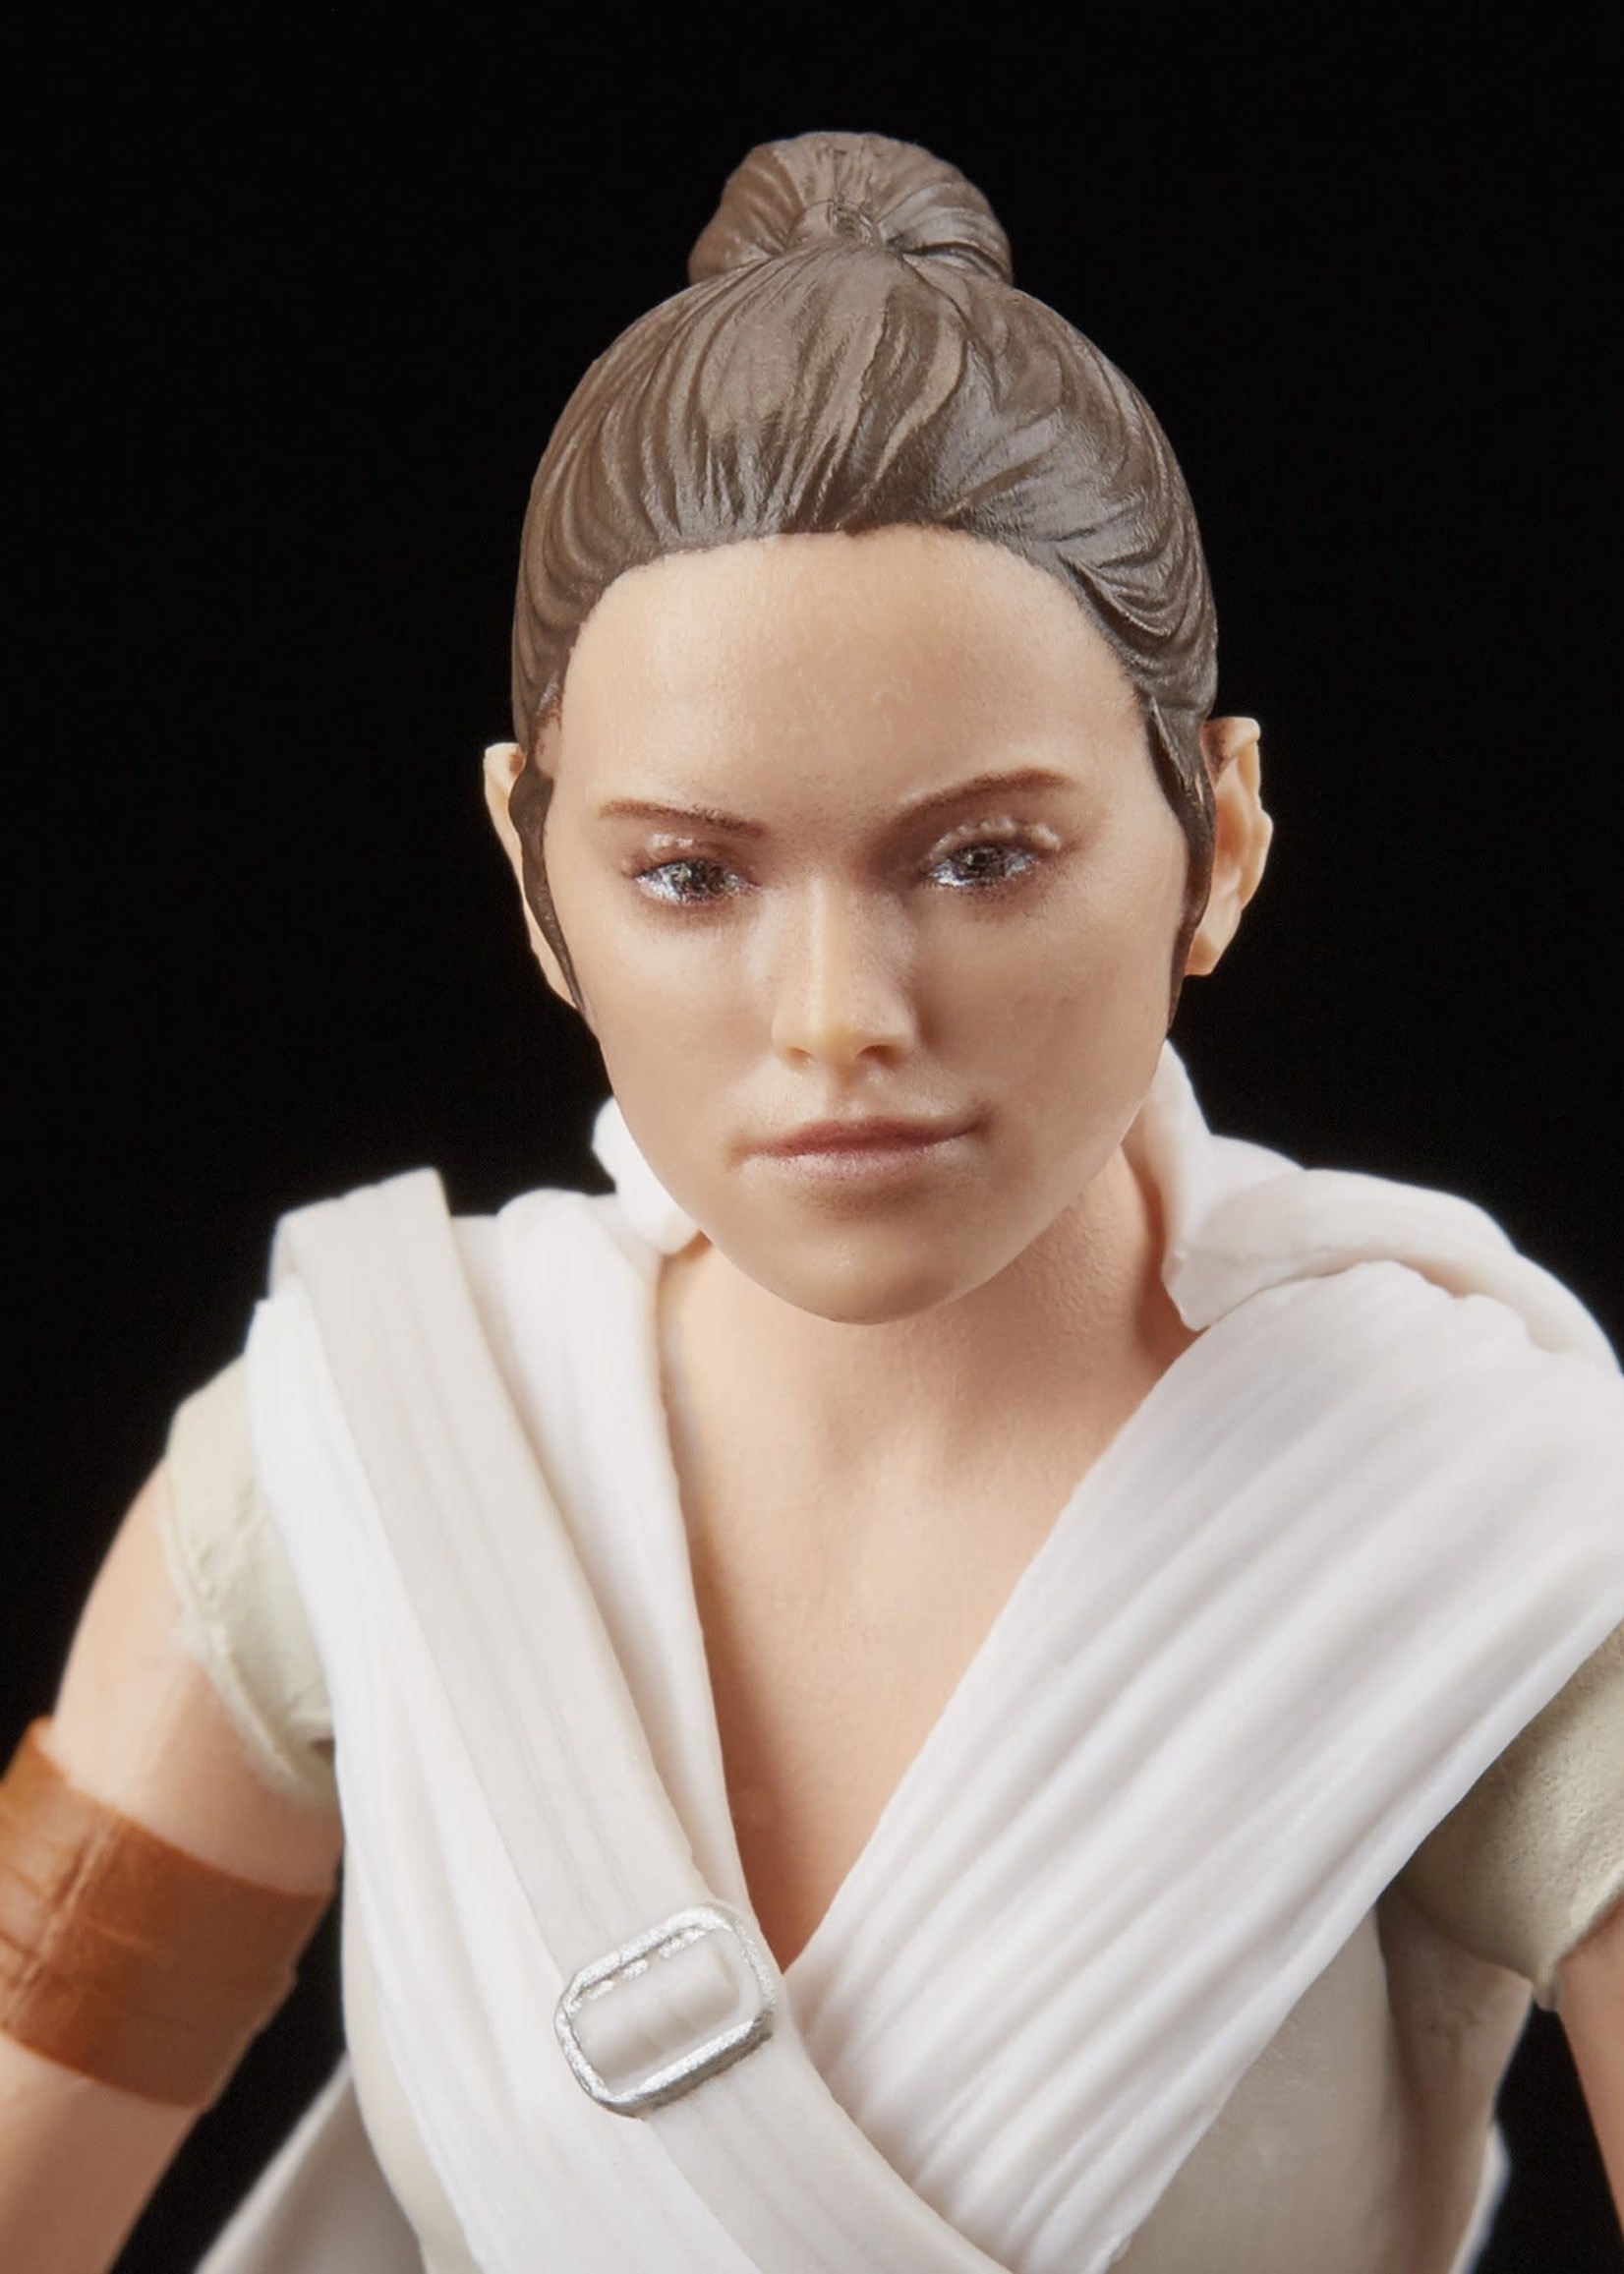 Star Wars Star Wars The Black Series: Rey and D-O Figures